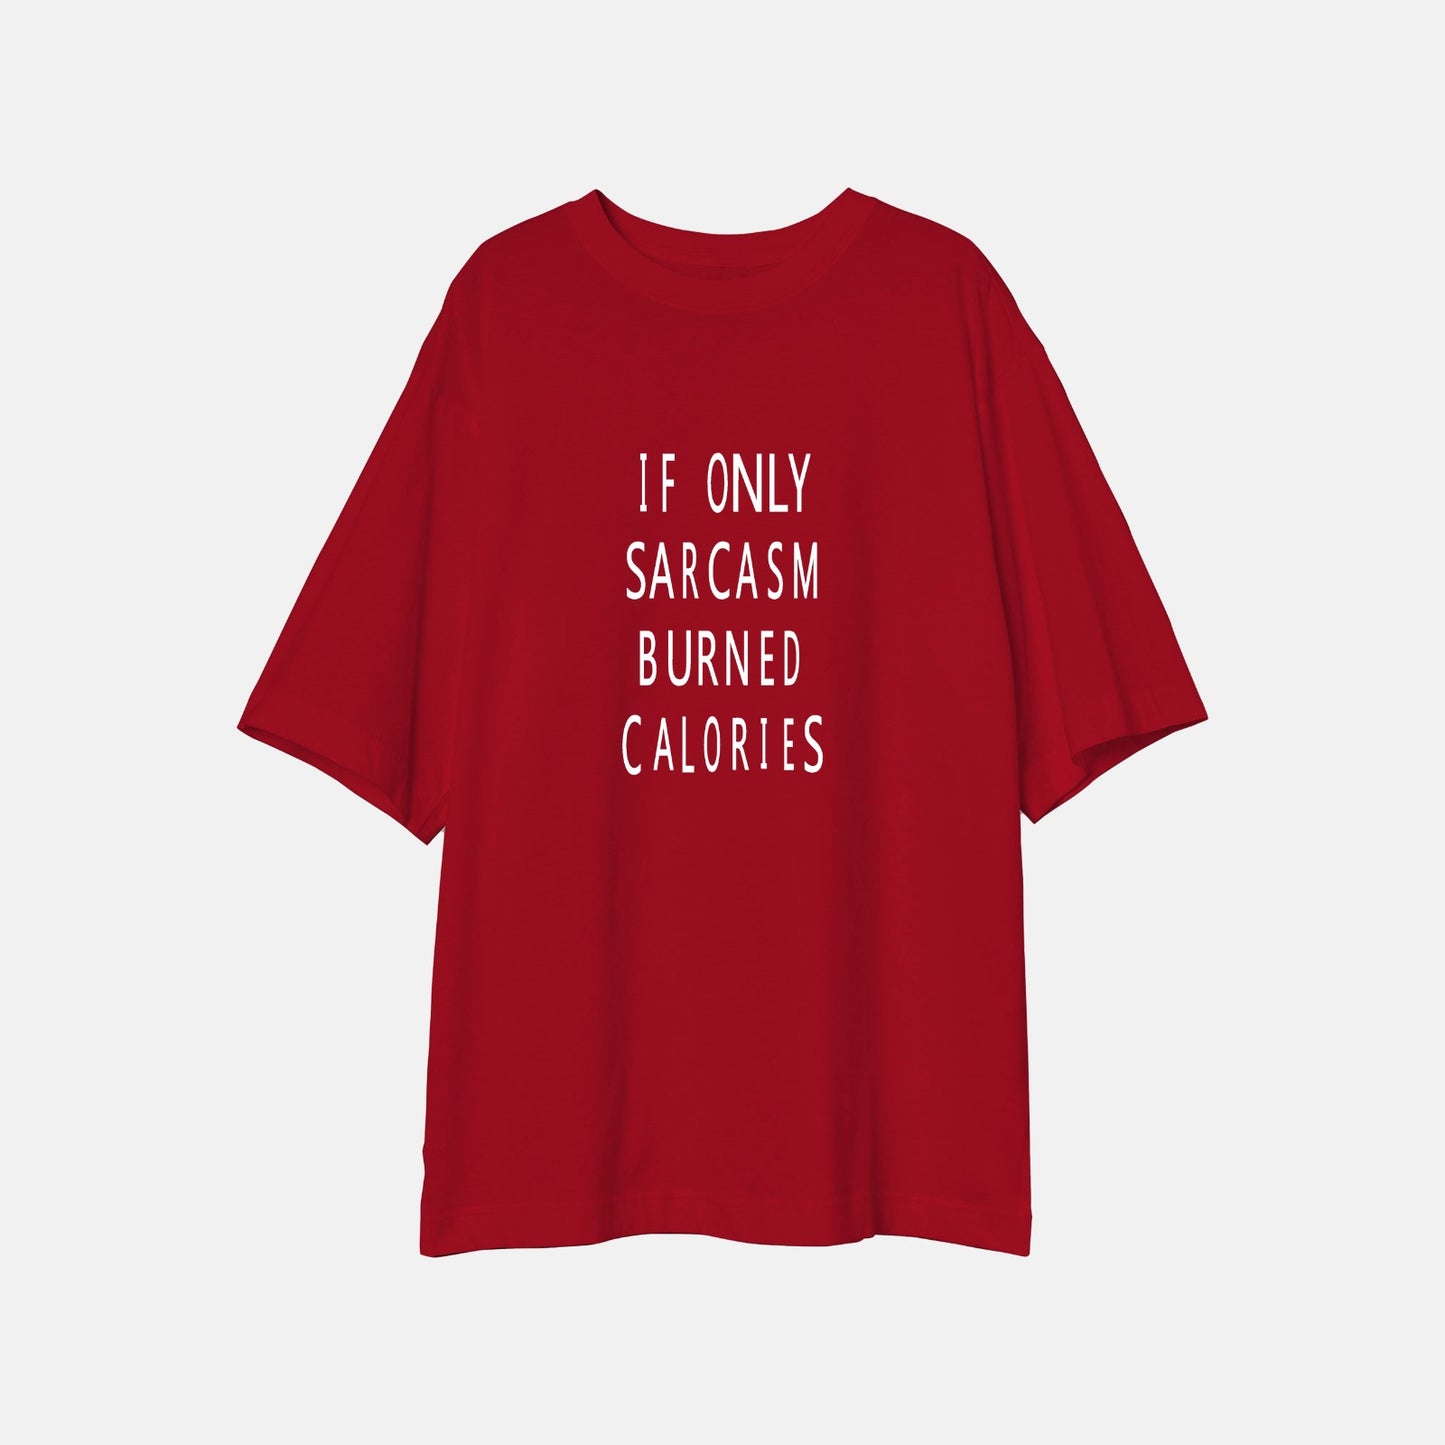 If only Sarcasm burned calories - Printed Oversized Tees